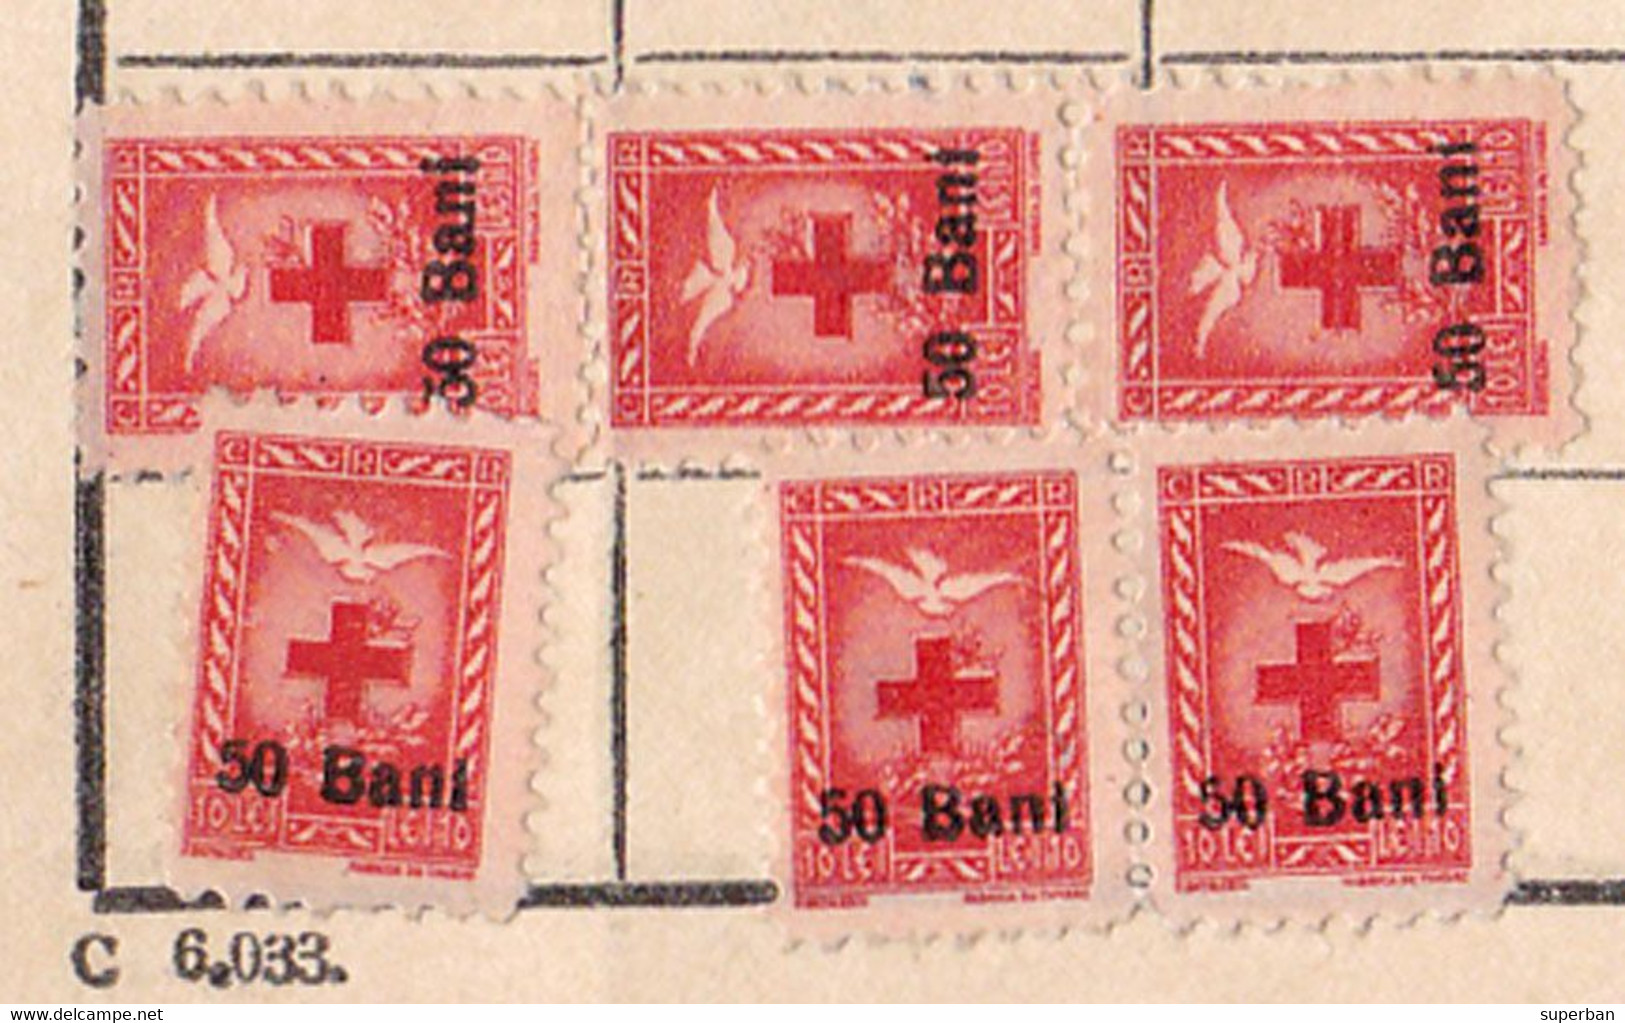 CRUCEA ROSIE / CROIX ROUGE / RED CROSS - DUES TICKET - 9 TIMBRES : 50 BANI / 10 LEI - 1952 / 1953 - CINDERELLA (ai406) - Revenue Stamps